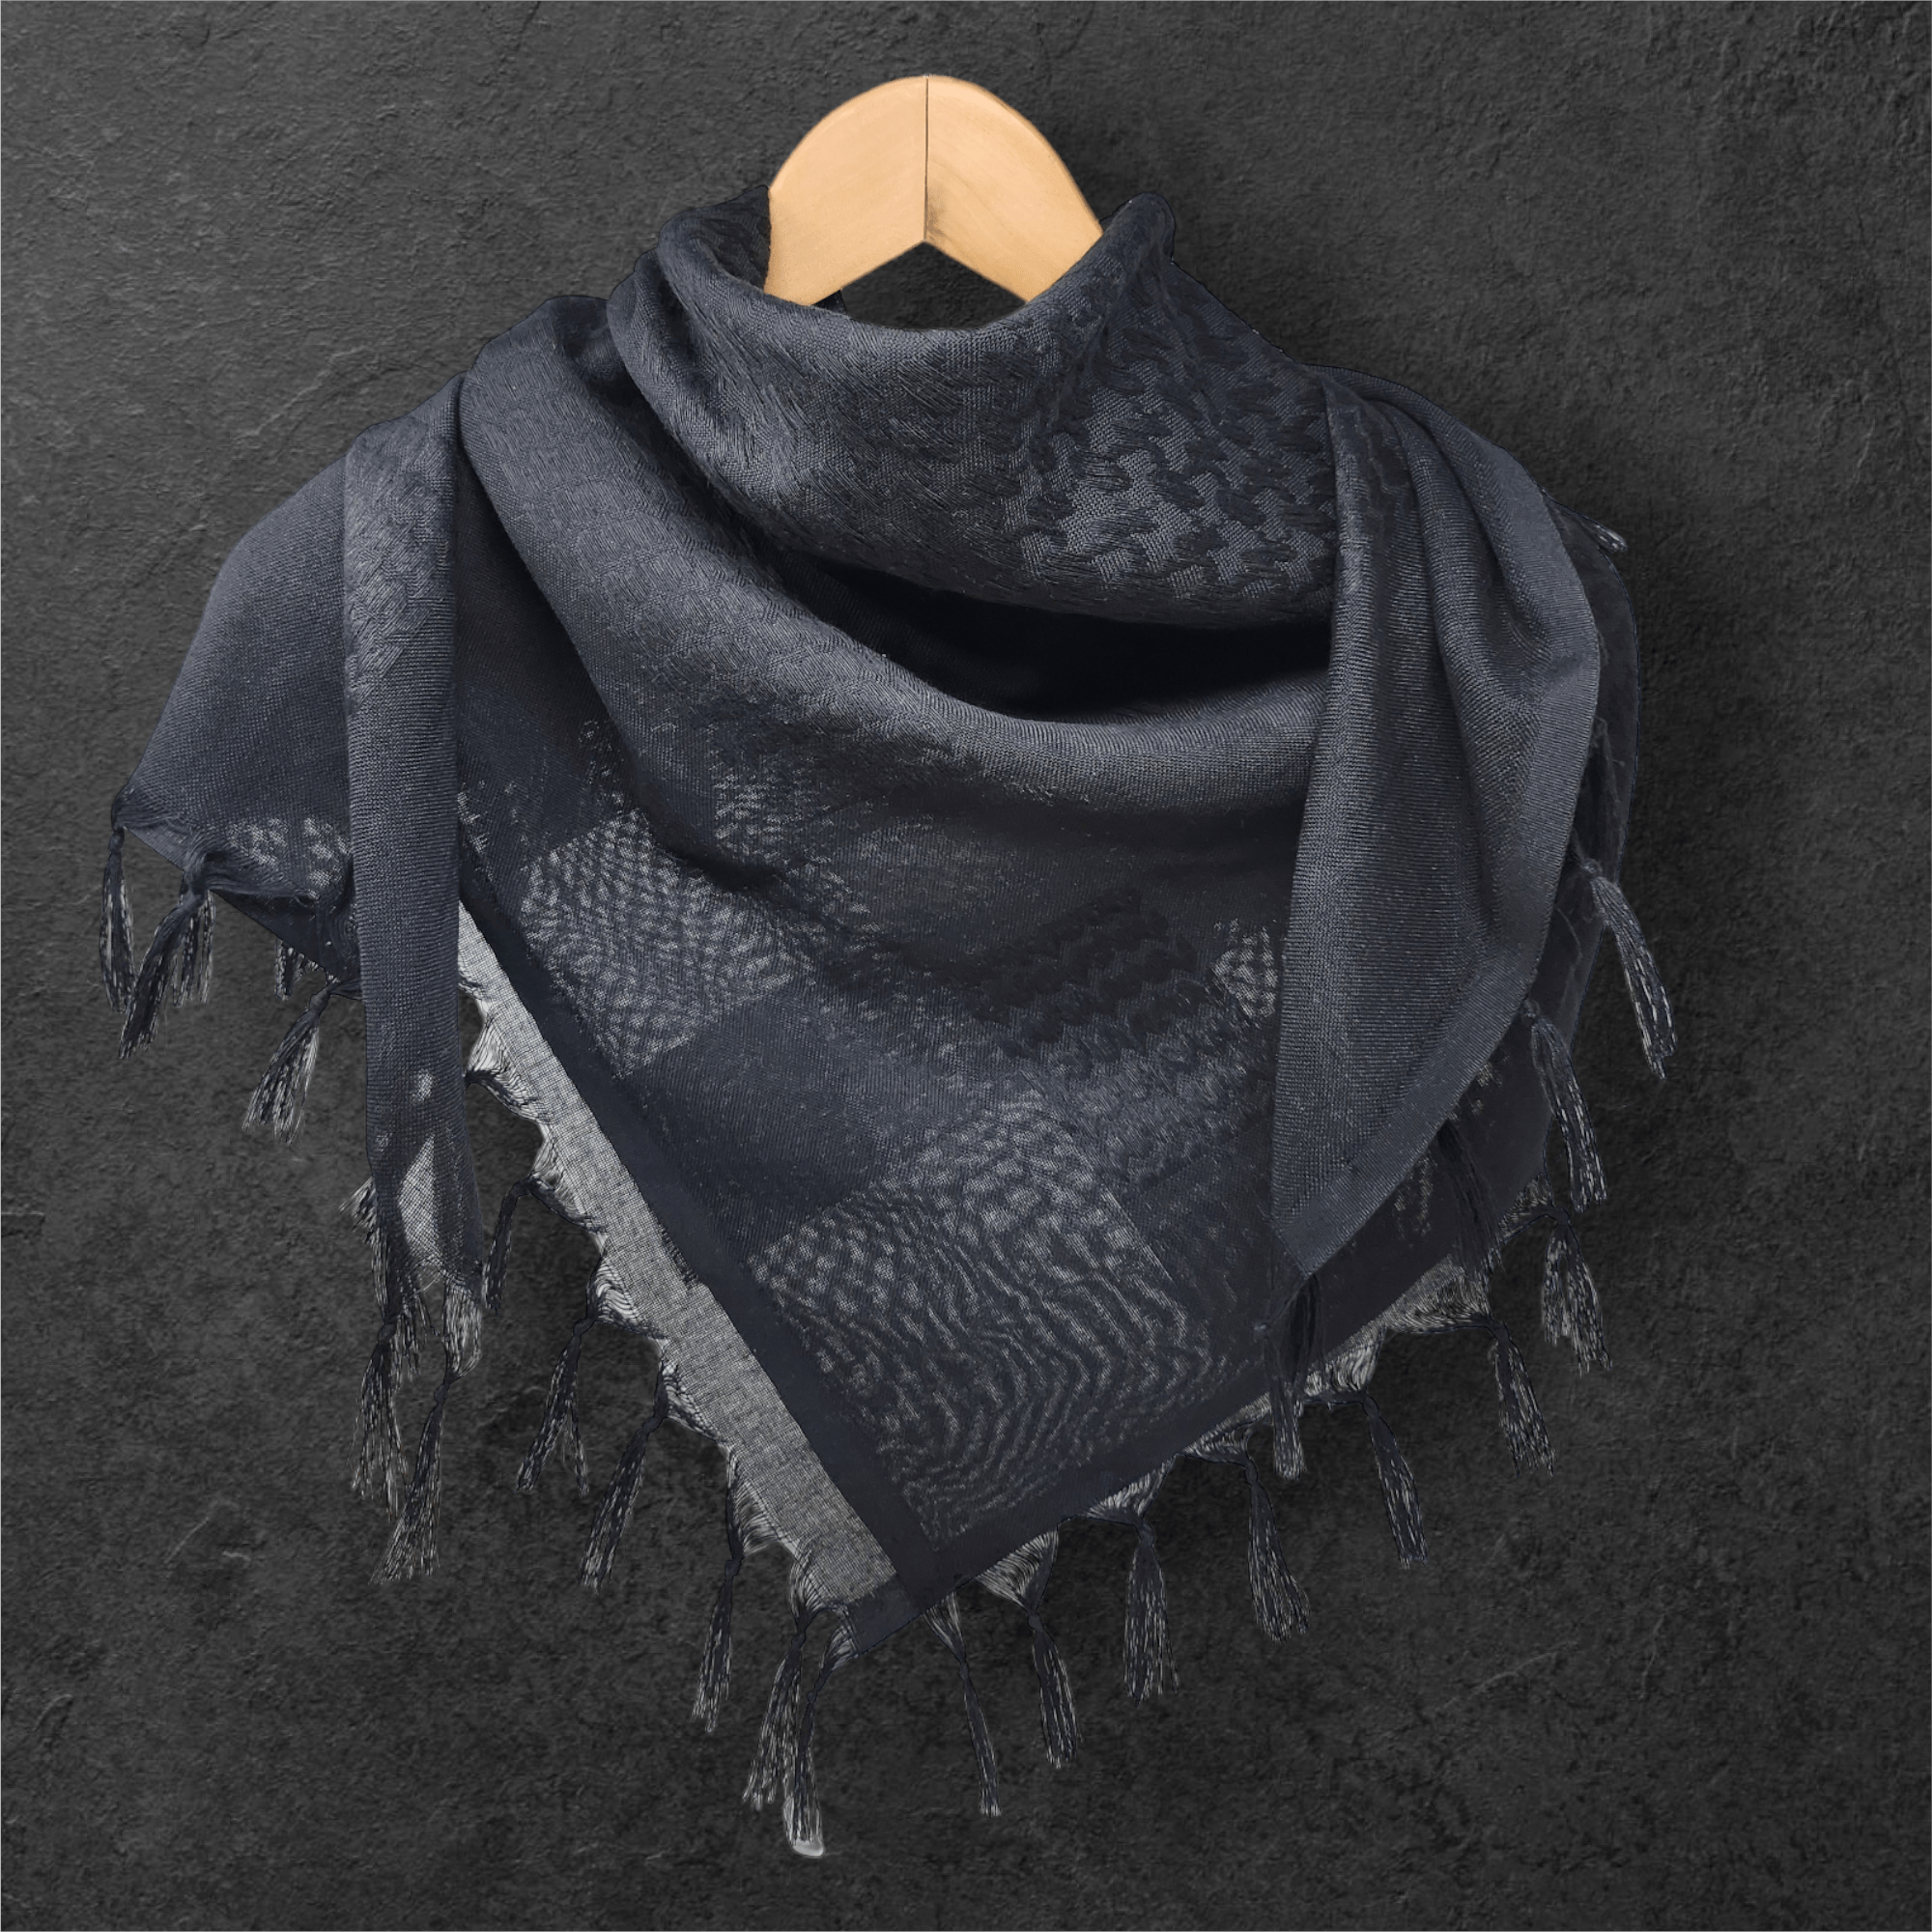 Keffiyeh Shemagh Palestinian Scarf 100% Cotton - Black on Black - Mideast Grocers